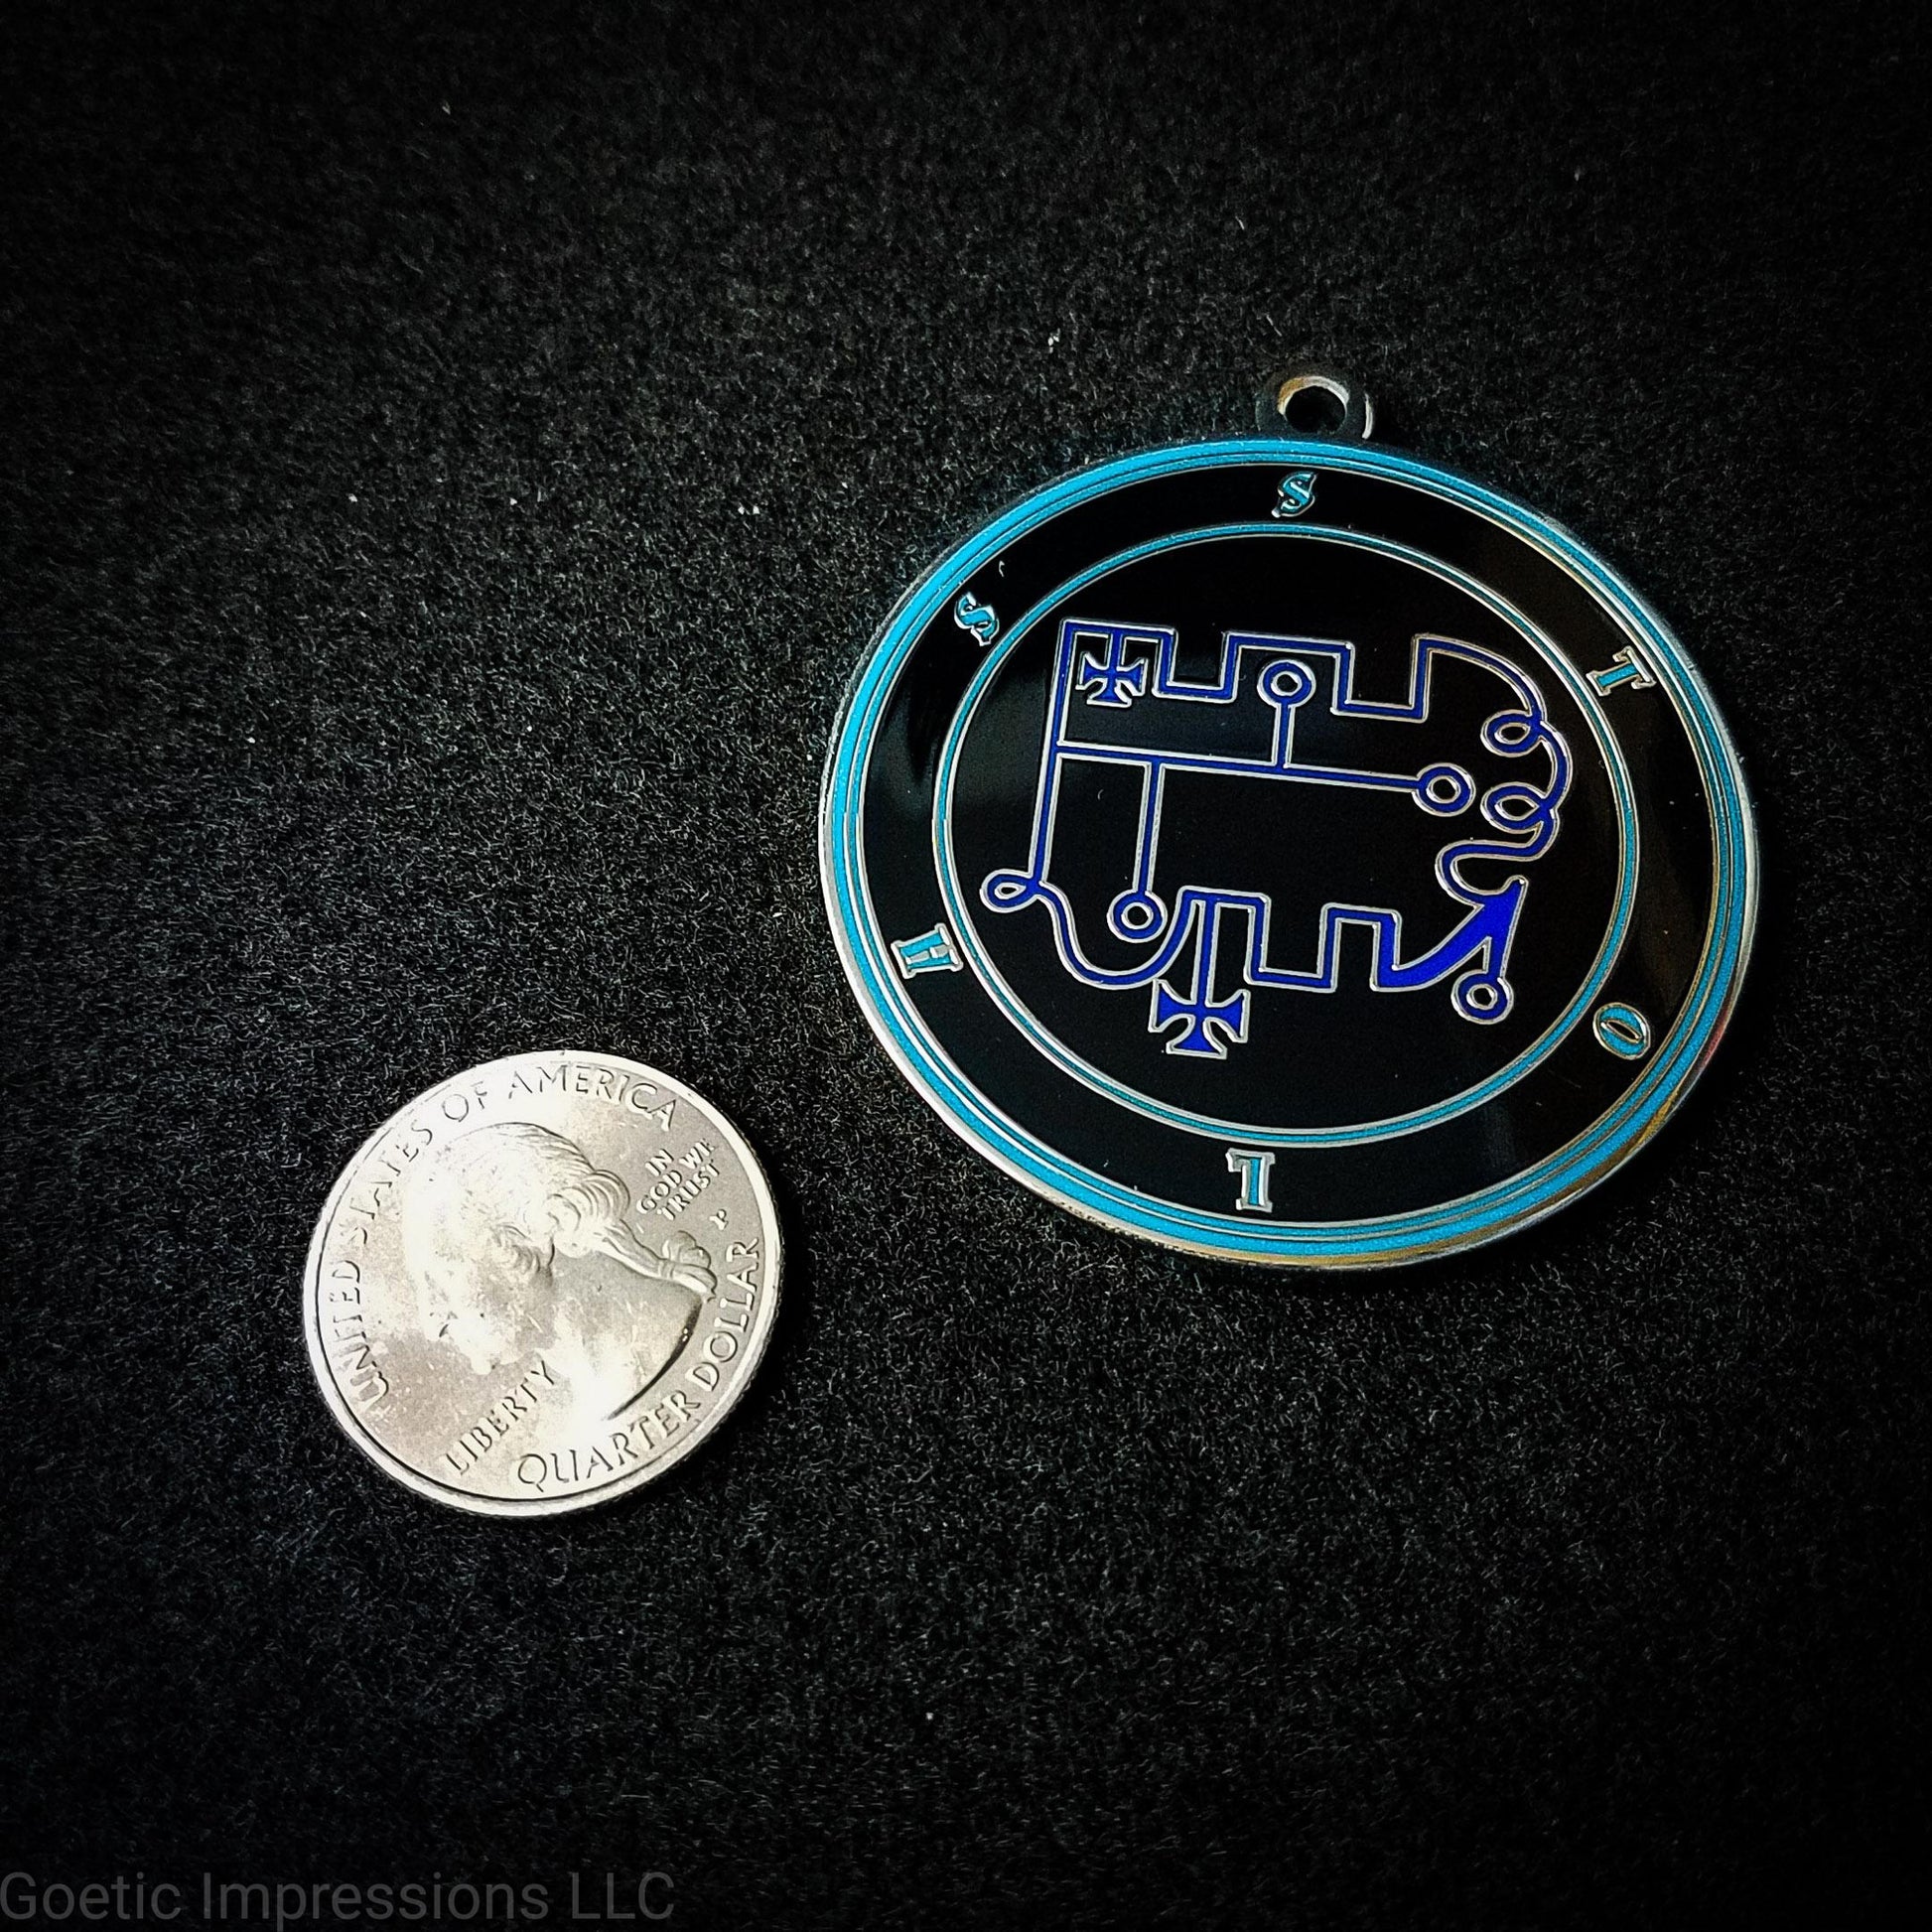 Seal of Stolas next to a quarter. The seal medallion measures two inches in diameter. The sigil is dark blue with teal letters and circles on a black background.